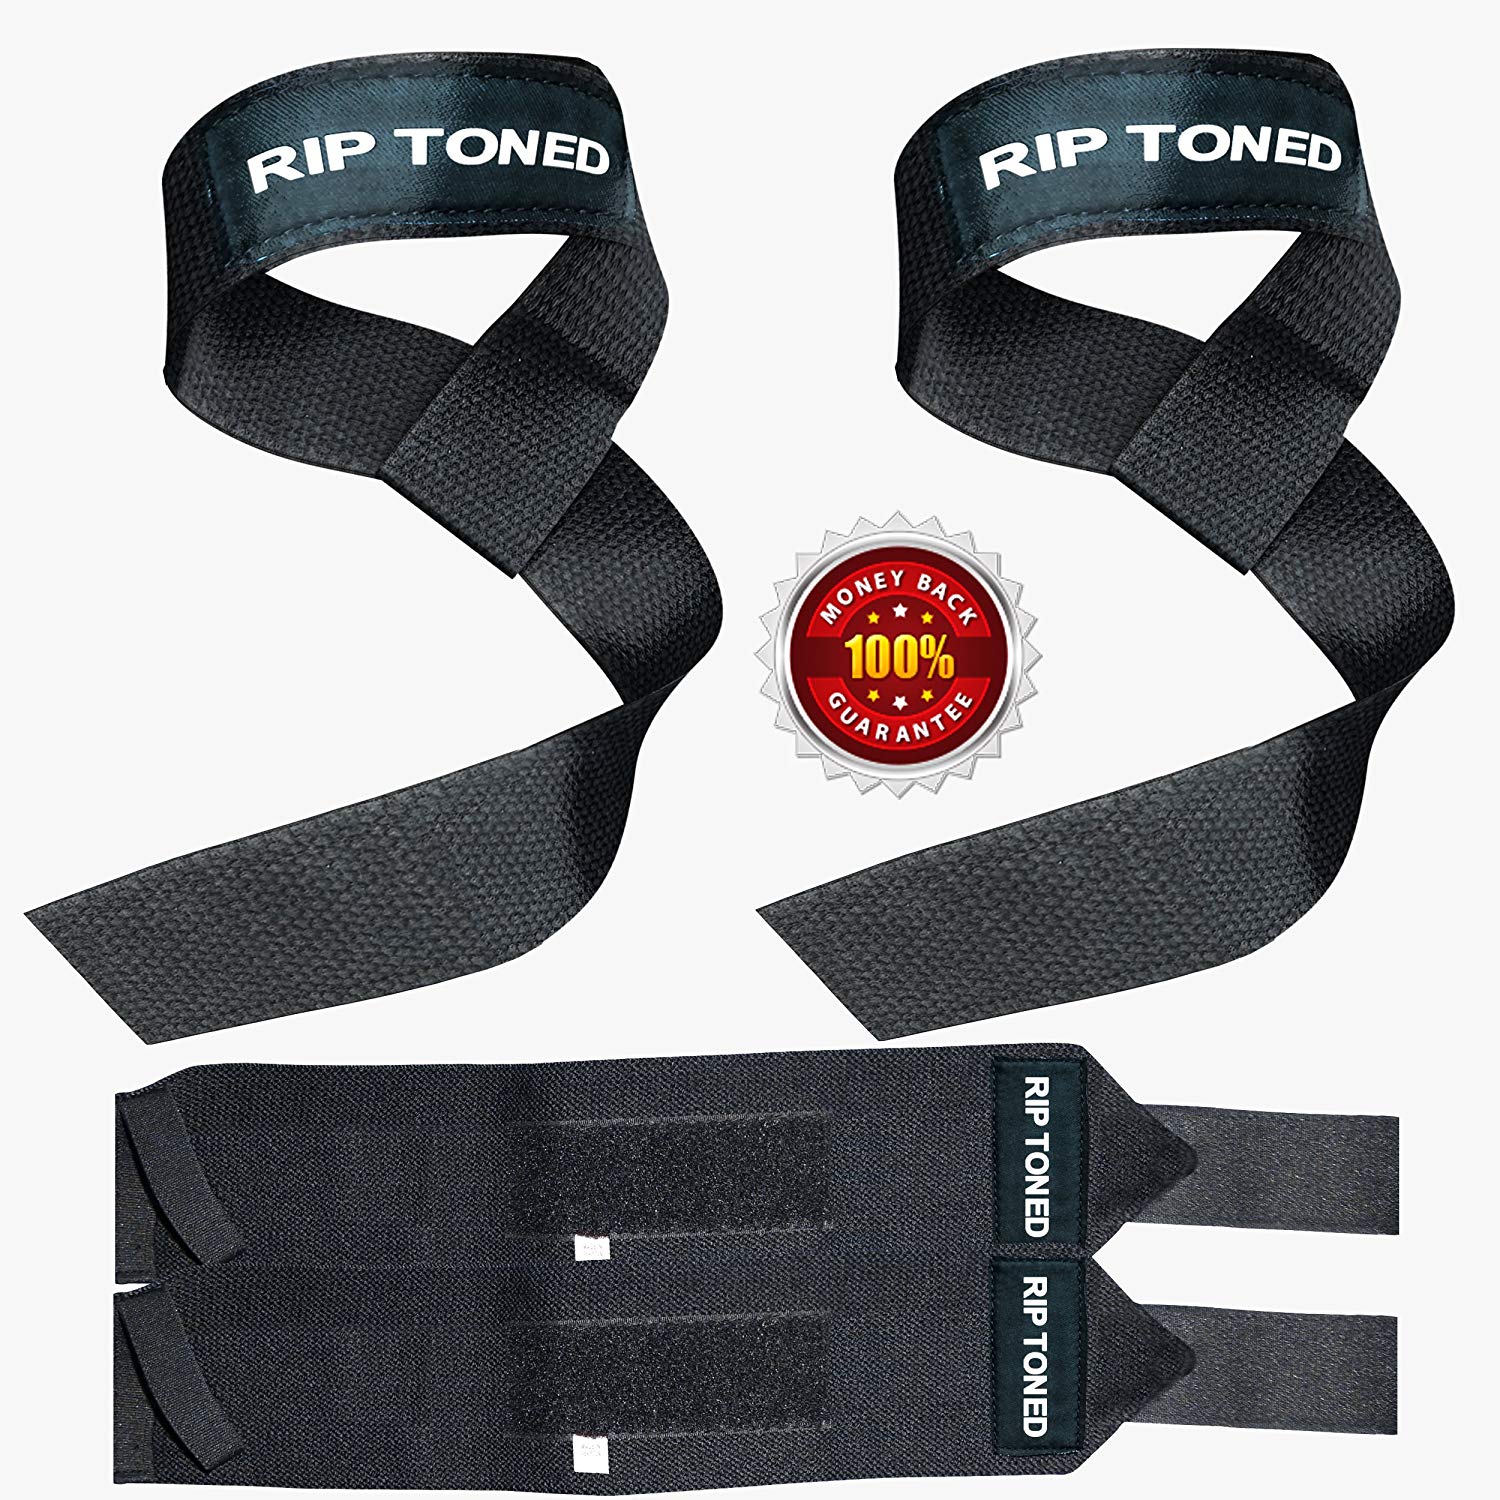  Rip Toned Lifting Straps For Weightlifting - Long 23 Inch  Deadlifting Straps Lifting Wrist Straps For Men & Women